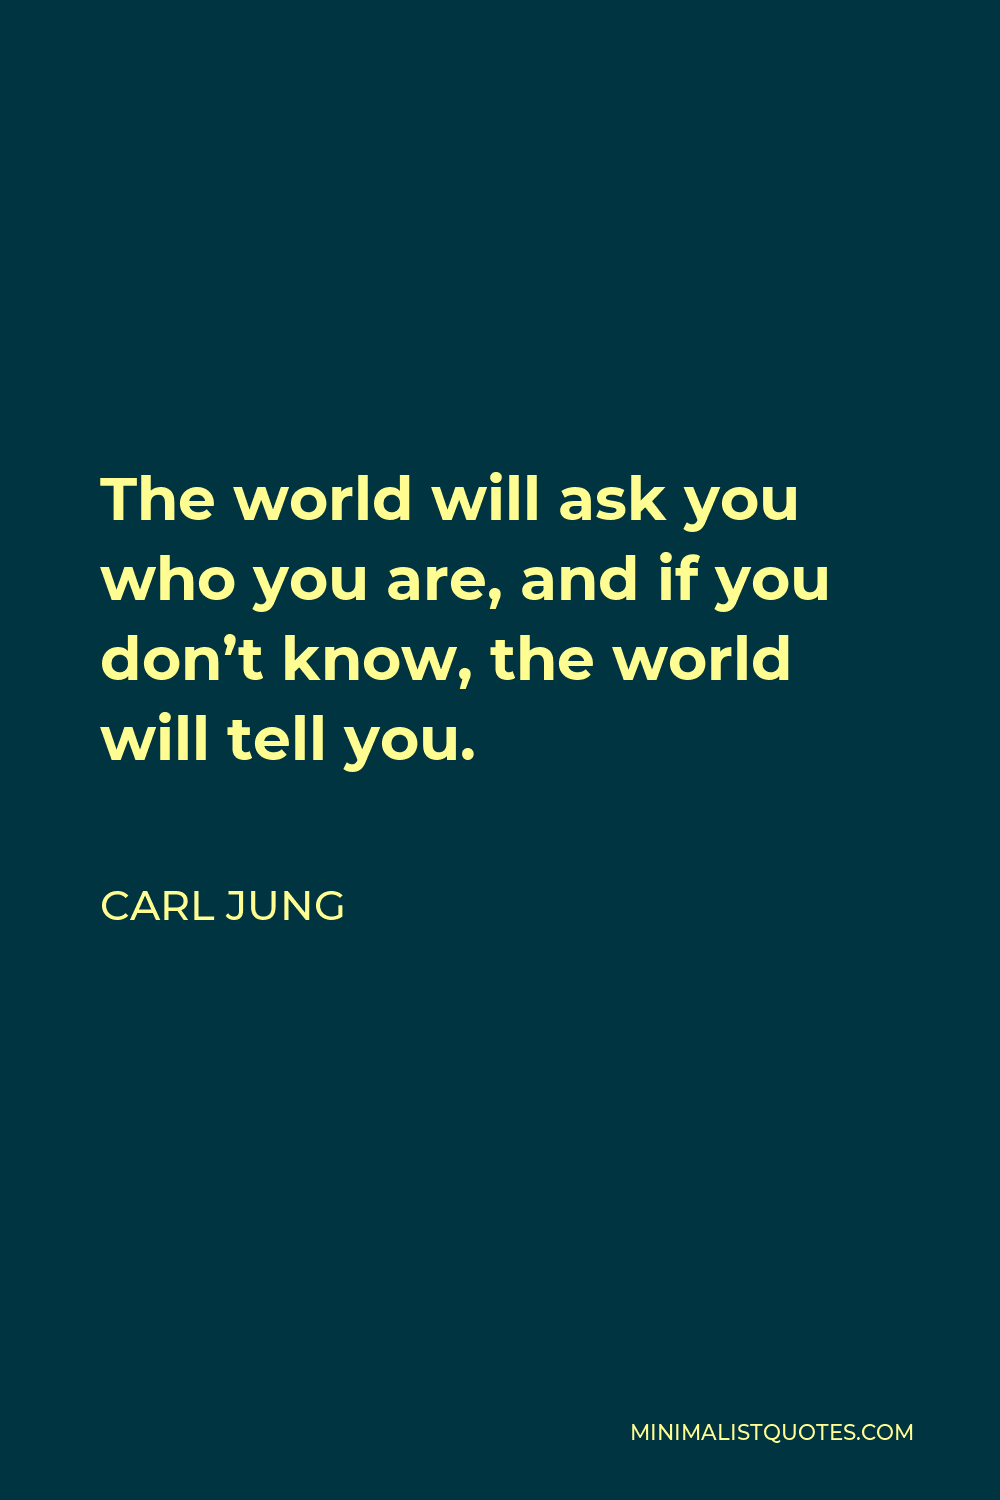 Carl Jung Quote - The world will ask you who you are, and if you don’t know, the world will tell you.